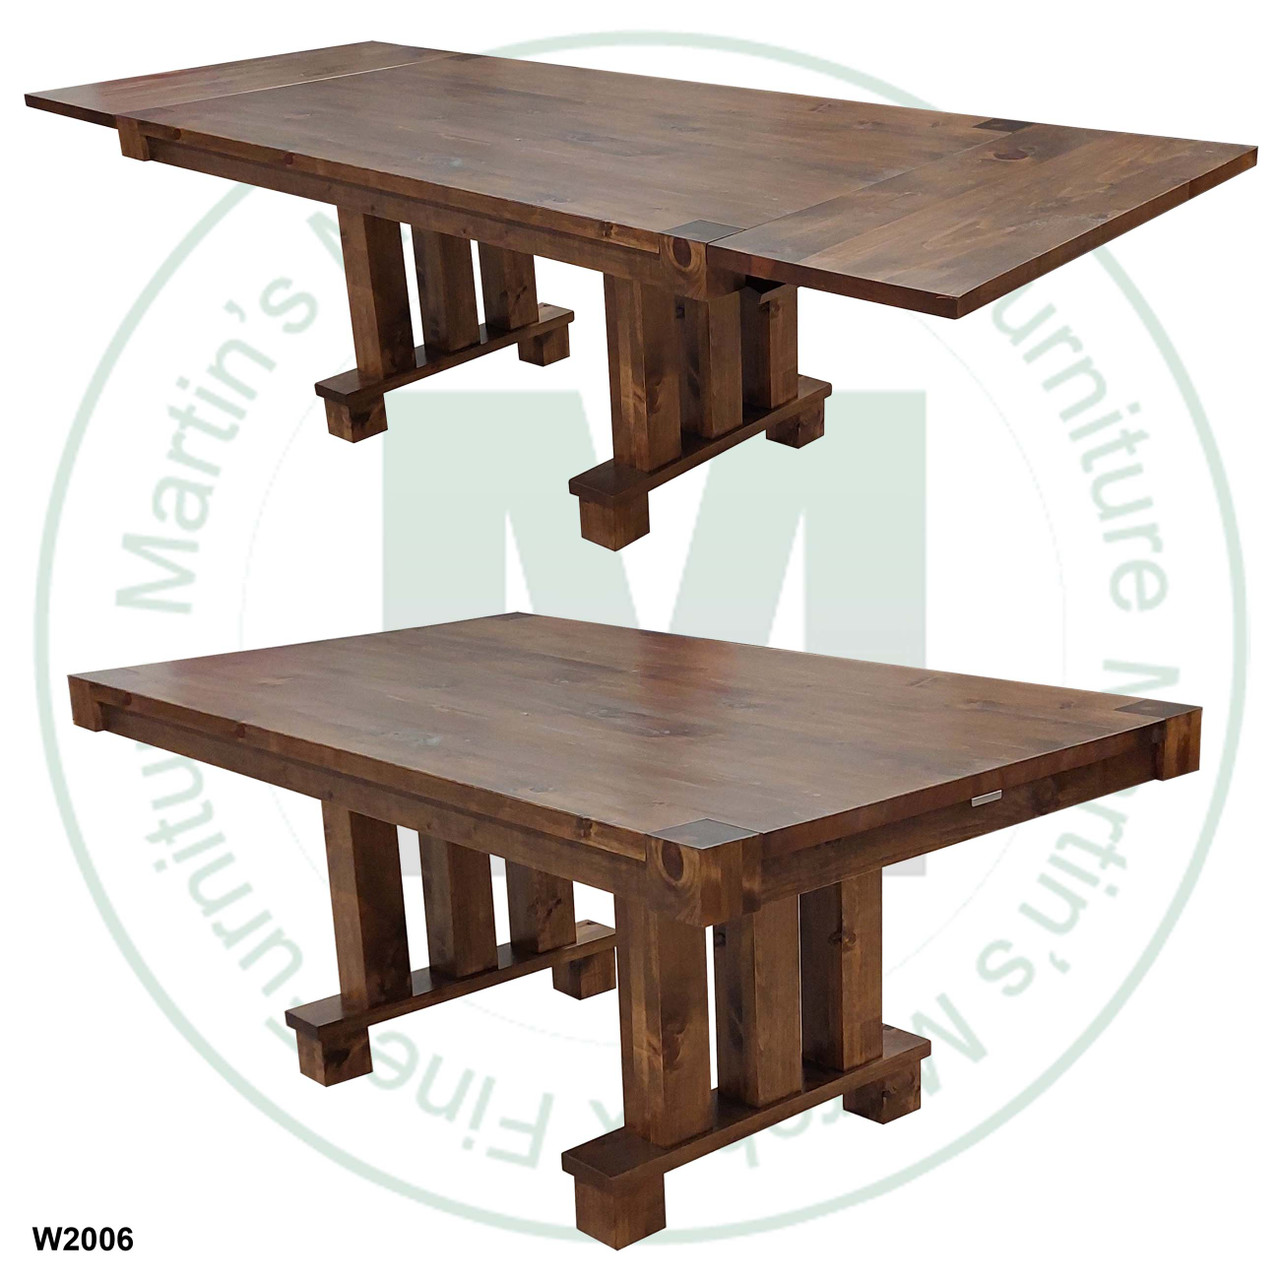 Oak Backwoods Solid Top Pedestal Table 42''D x 96''W x 30''H With 2 - 18'' Leaves